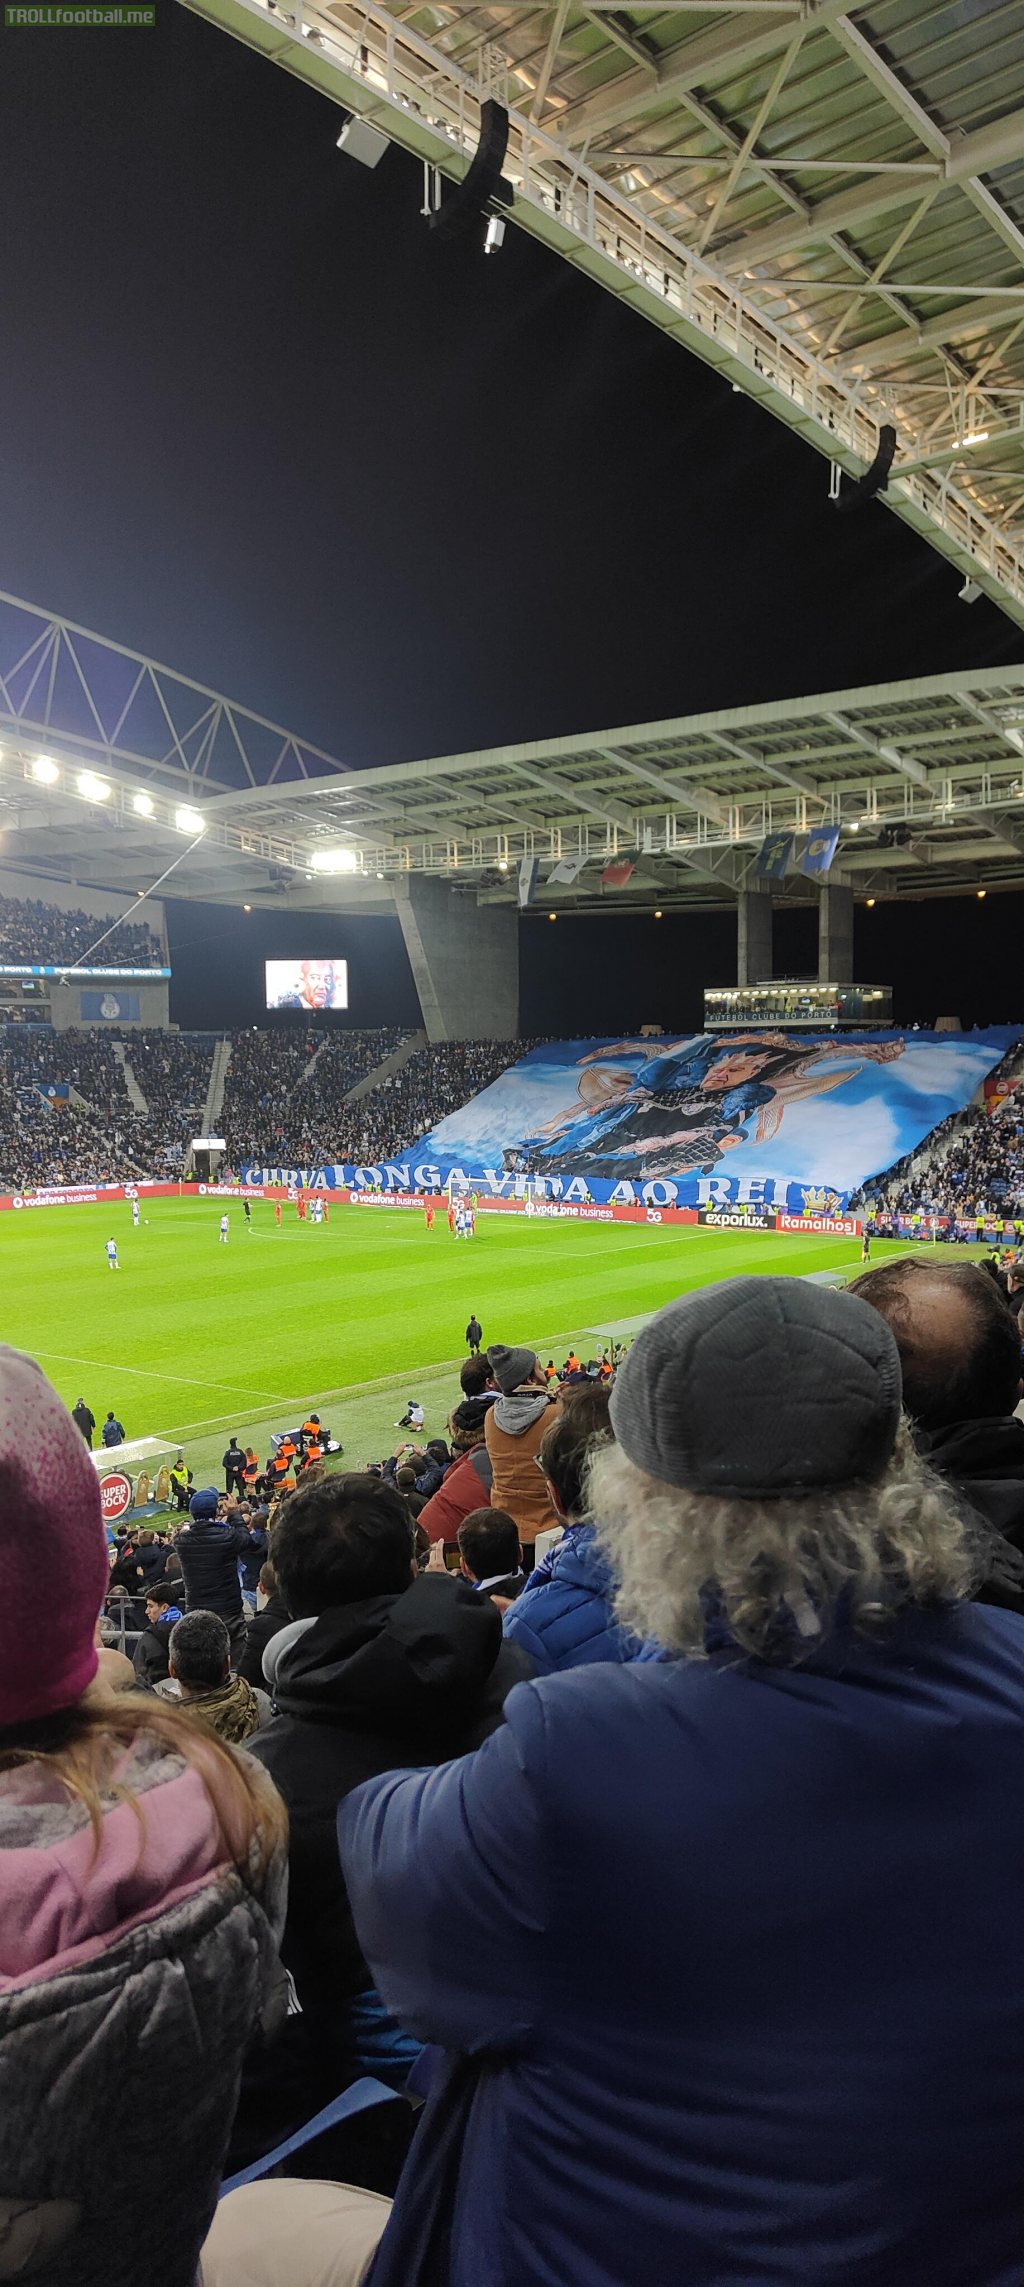 Yesterday's tribute to Porto's president on his birthday, with a banner reading "long live the king"